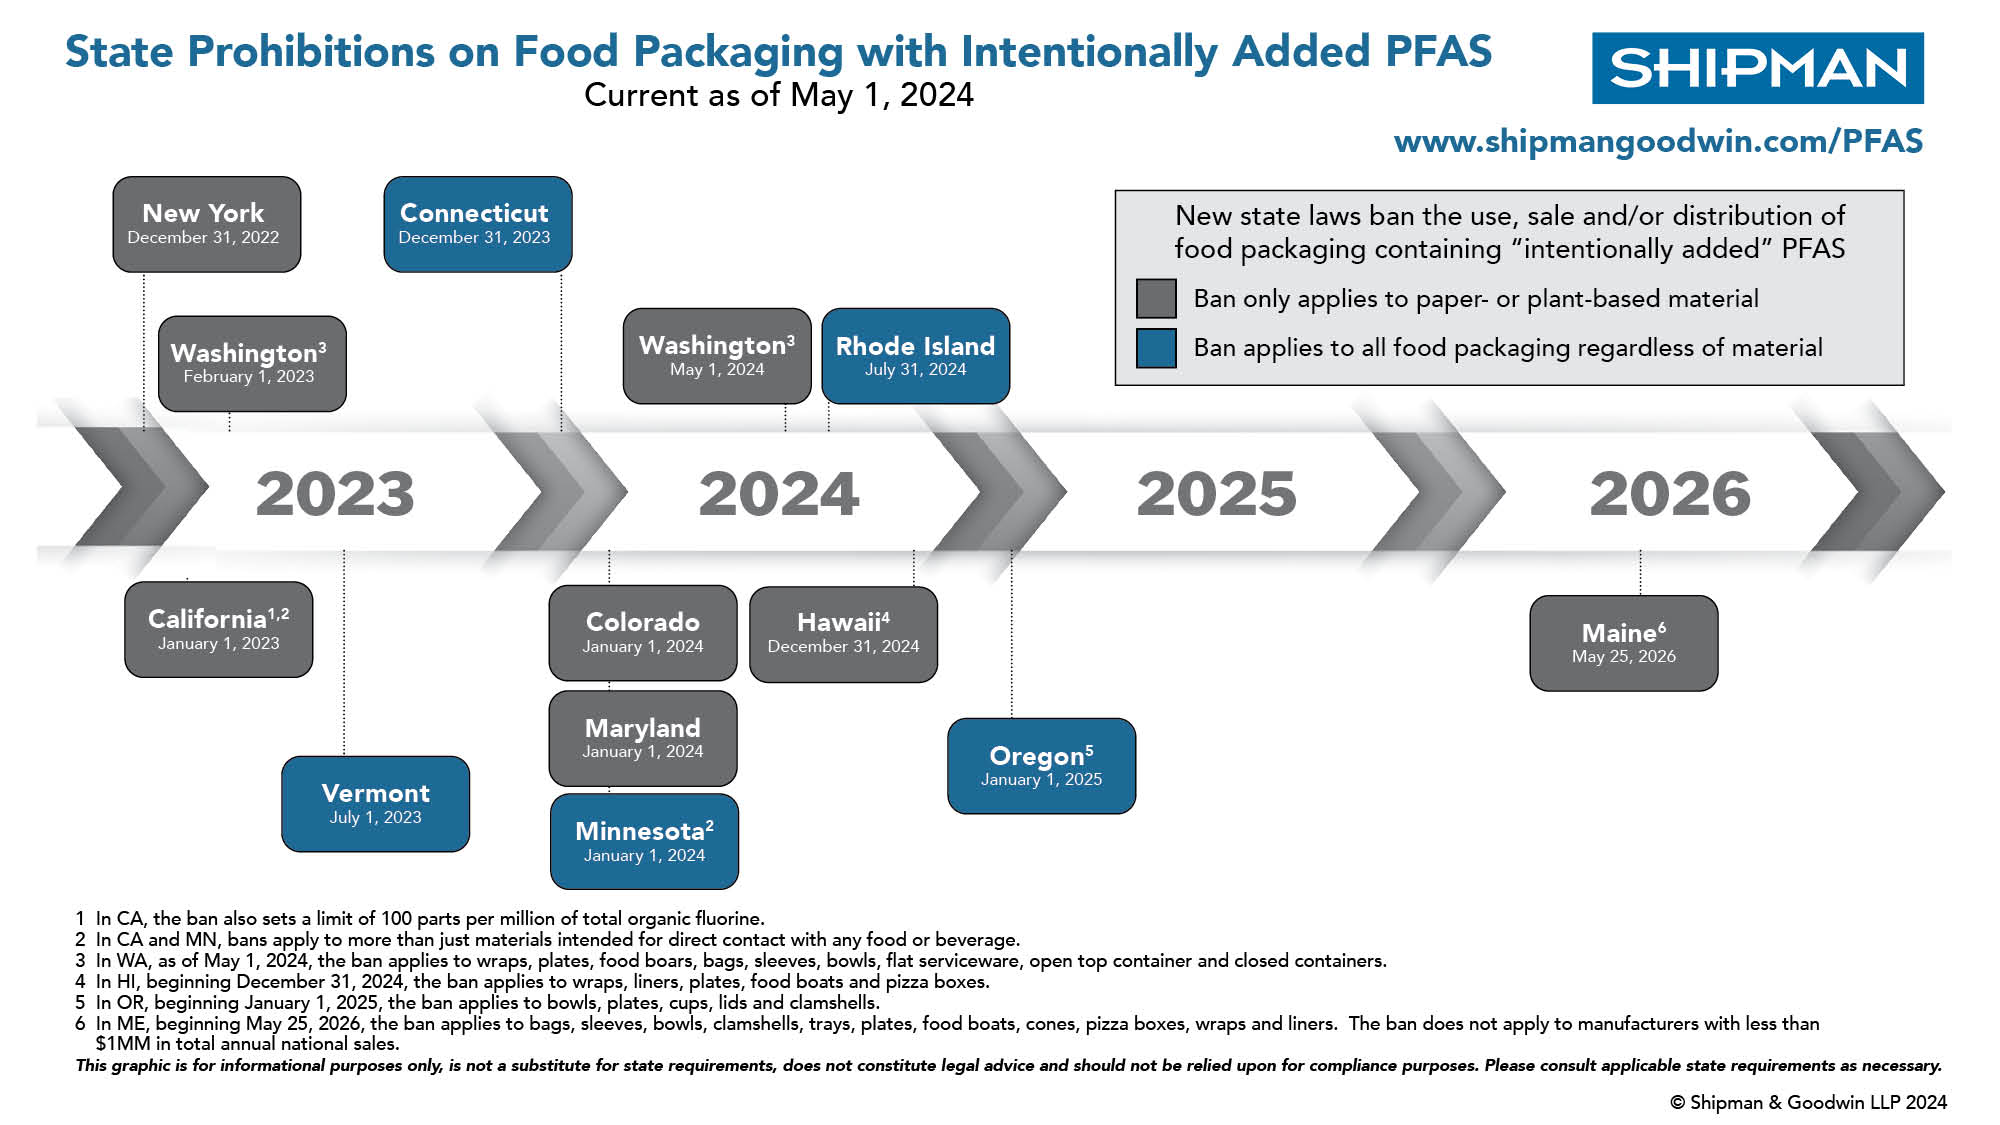 Timeline infographic of State Prohibitions on PFAS in Food Packaging